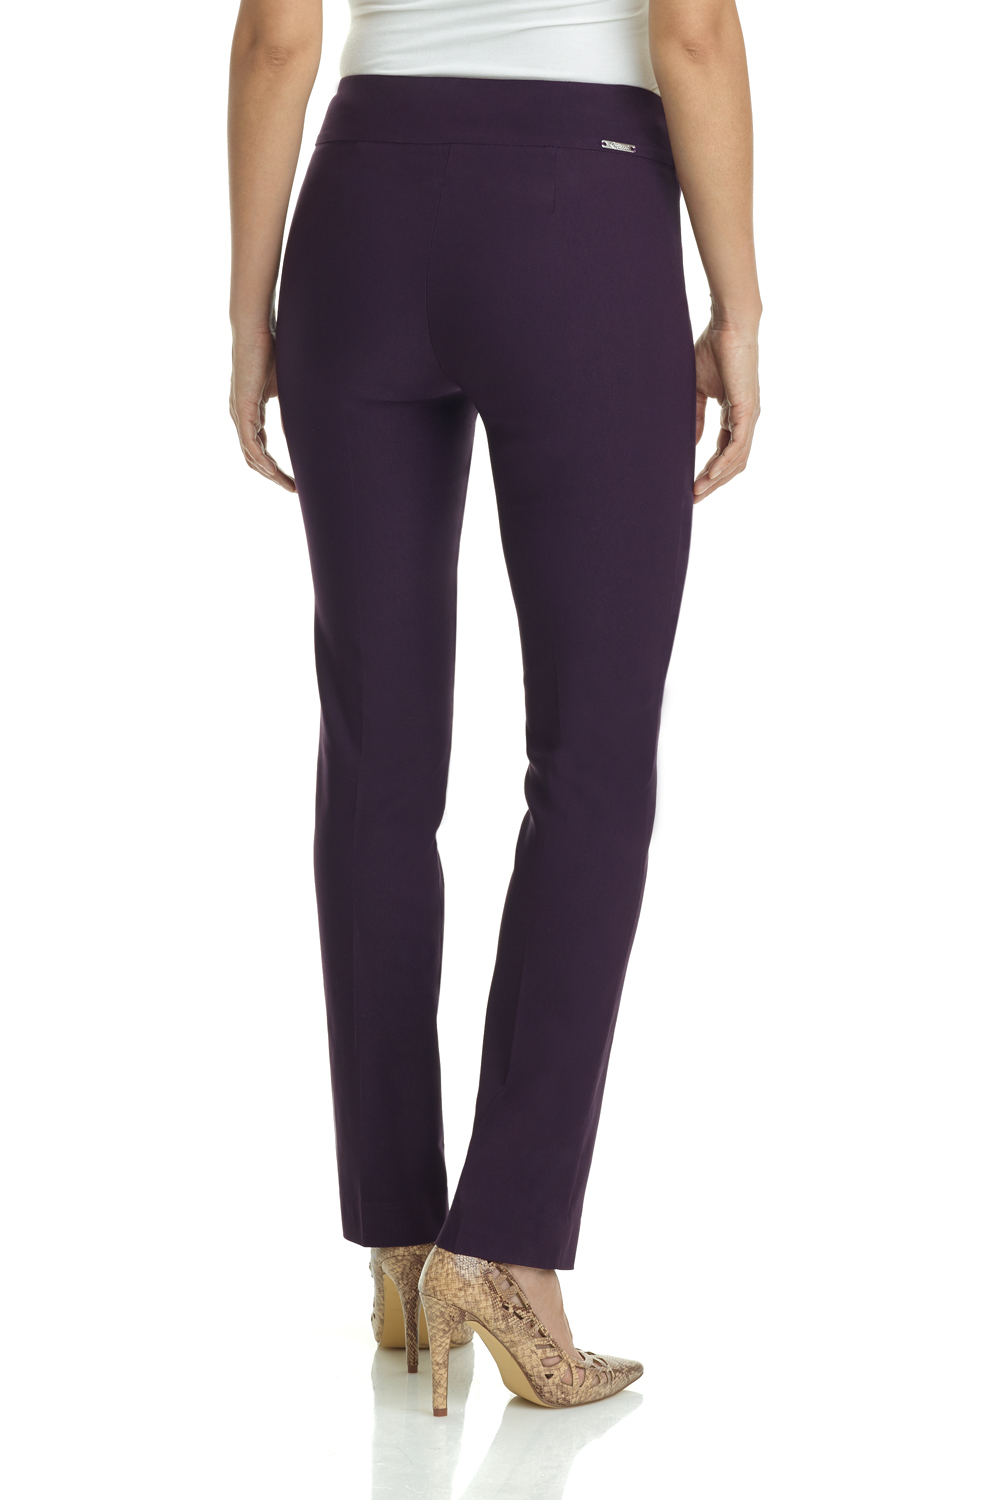 Rekucci Women's Ease Into Comfort Straight Leg Pant with Tummy Control